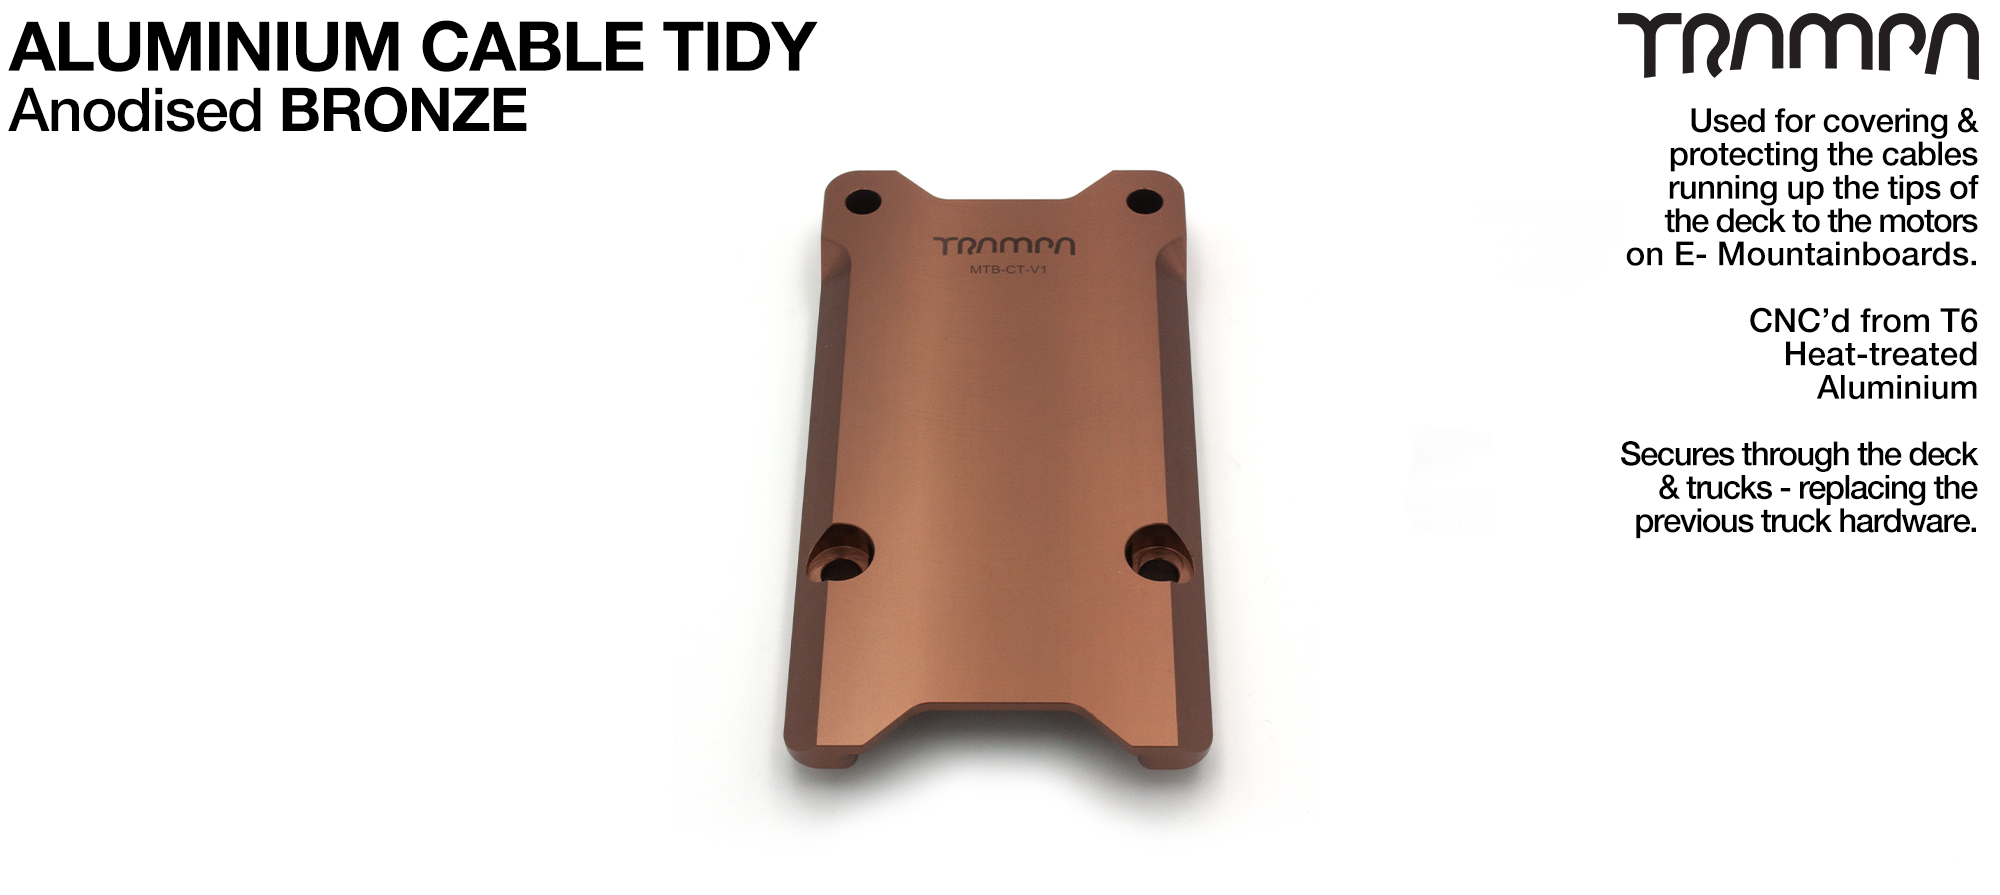 Anodised Aluminum Cable Tidy - BRONZE V1